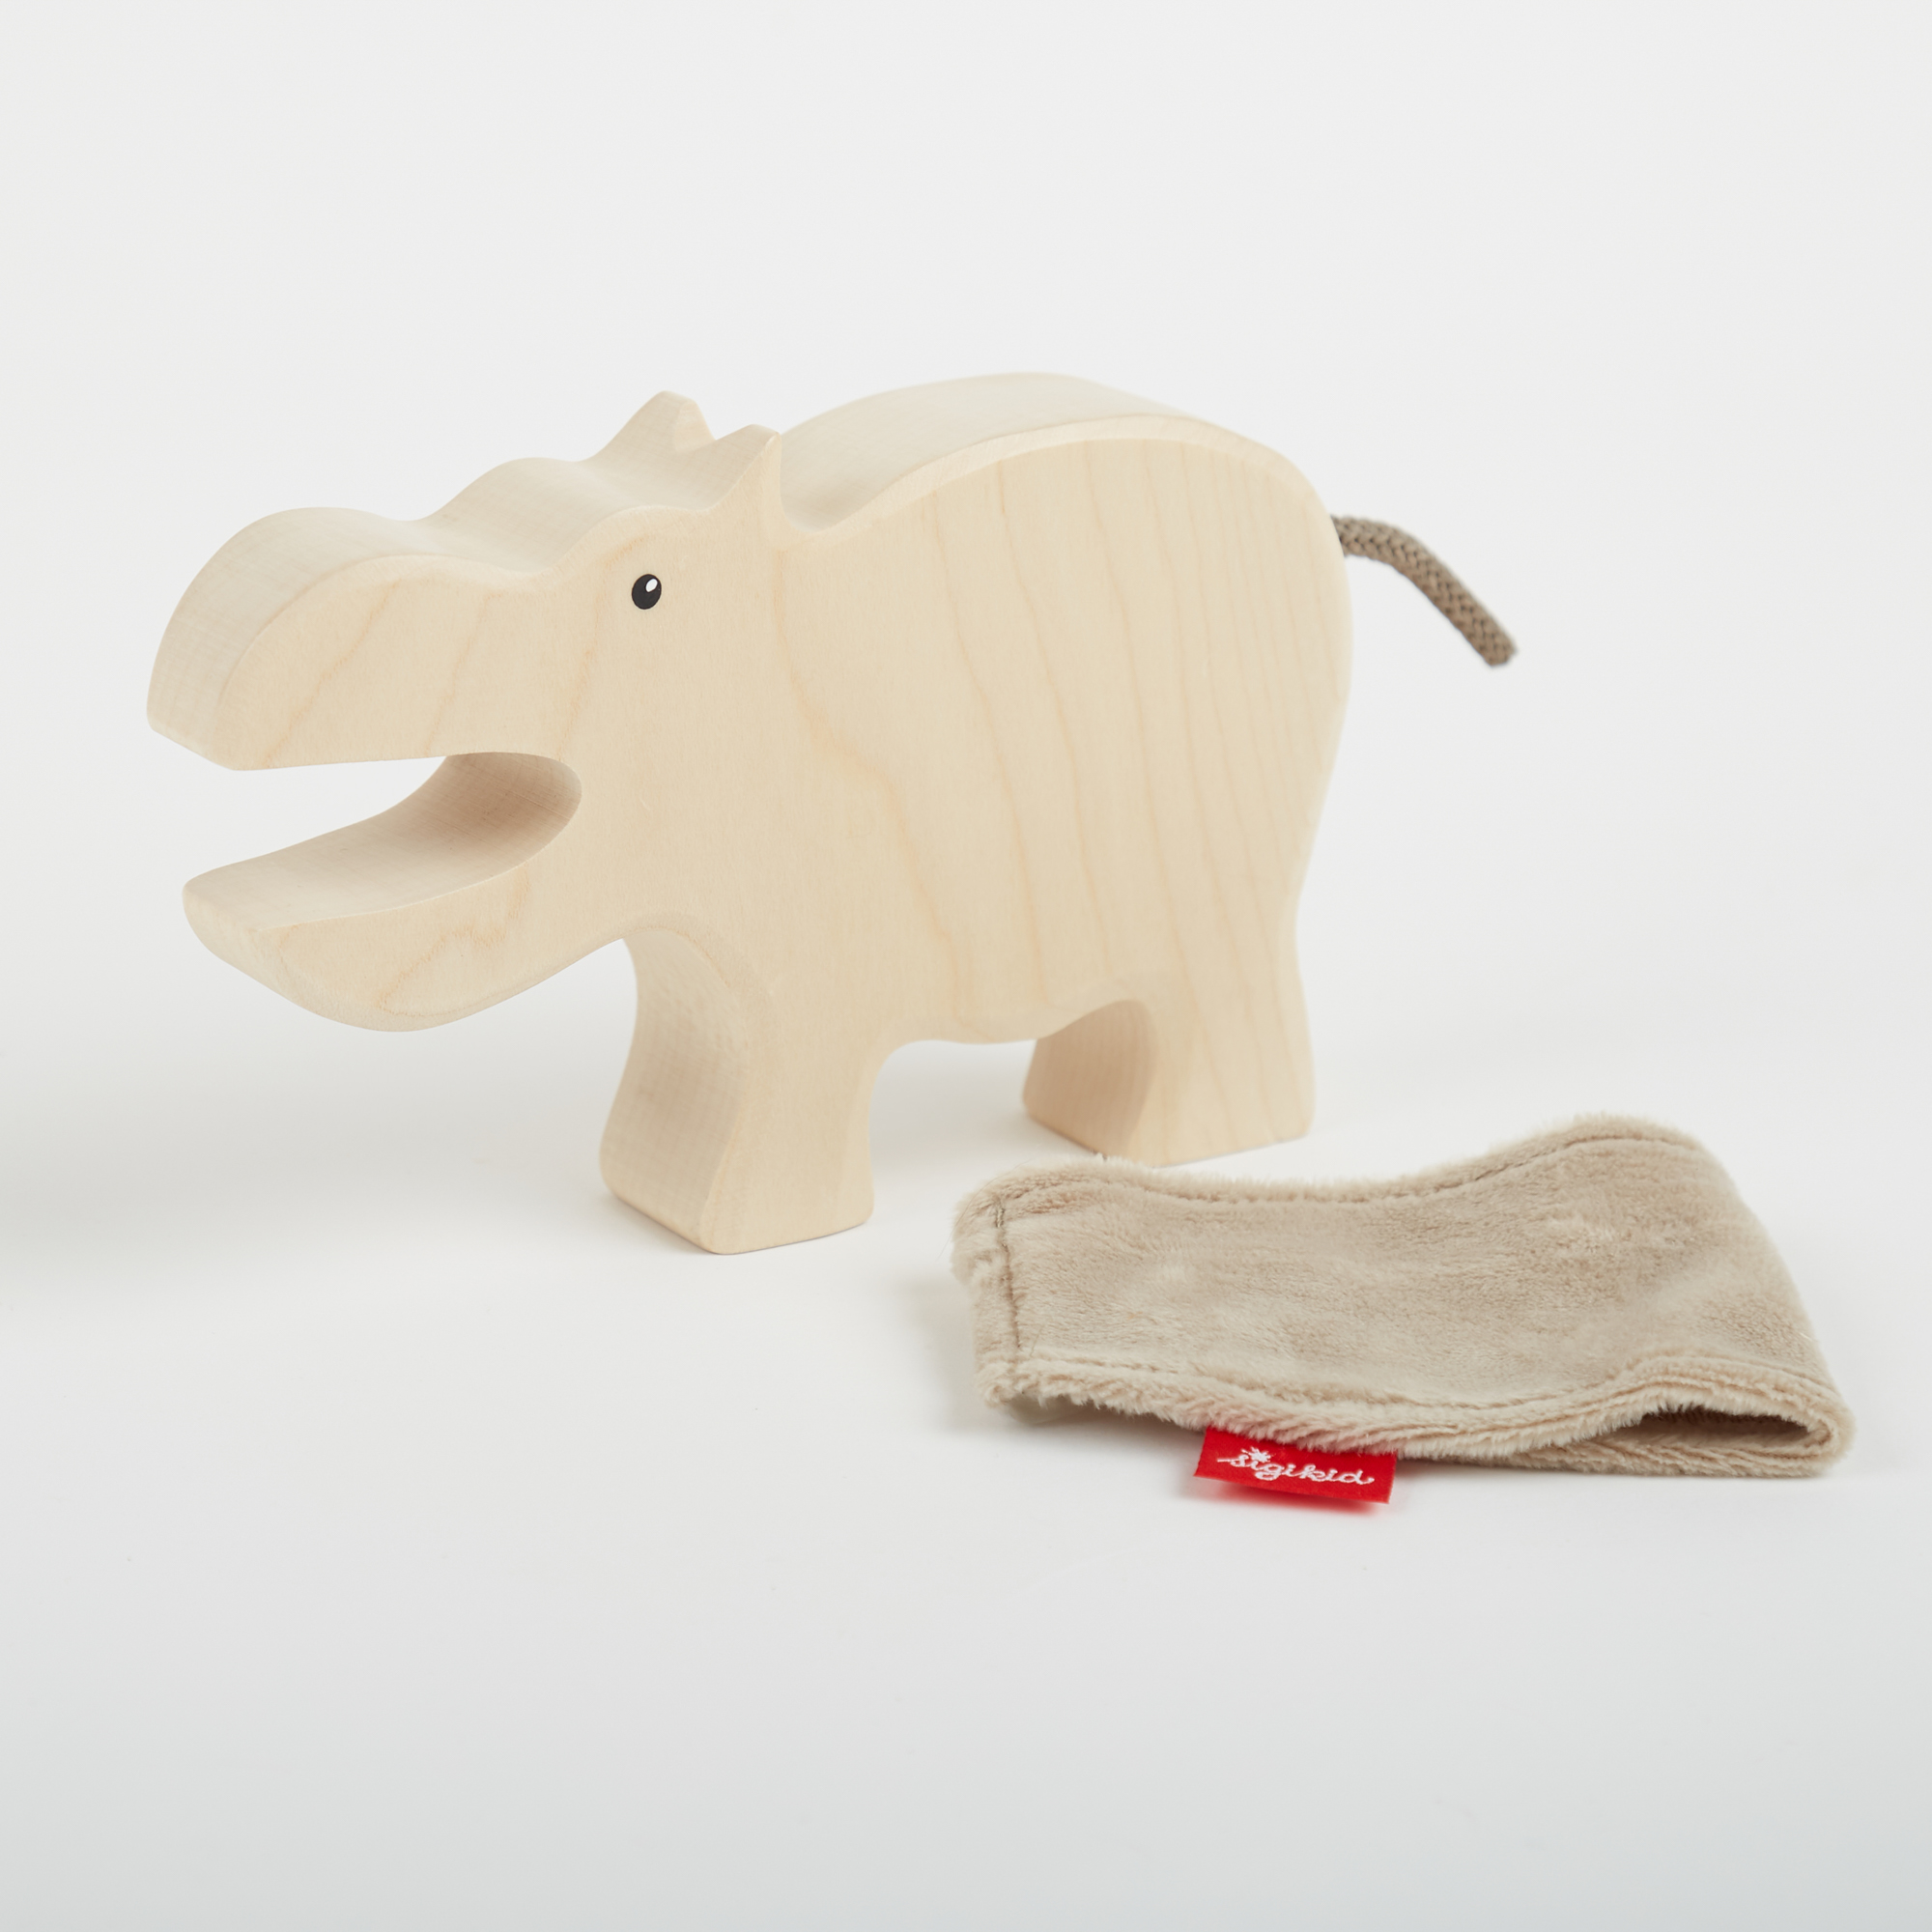 Wooden toy hippo with plush hide